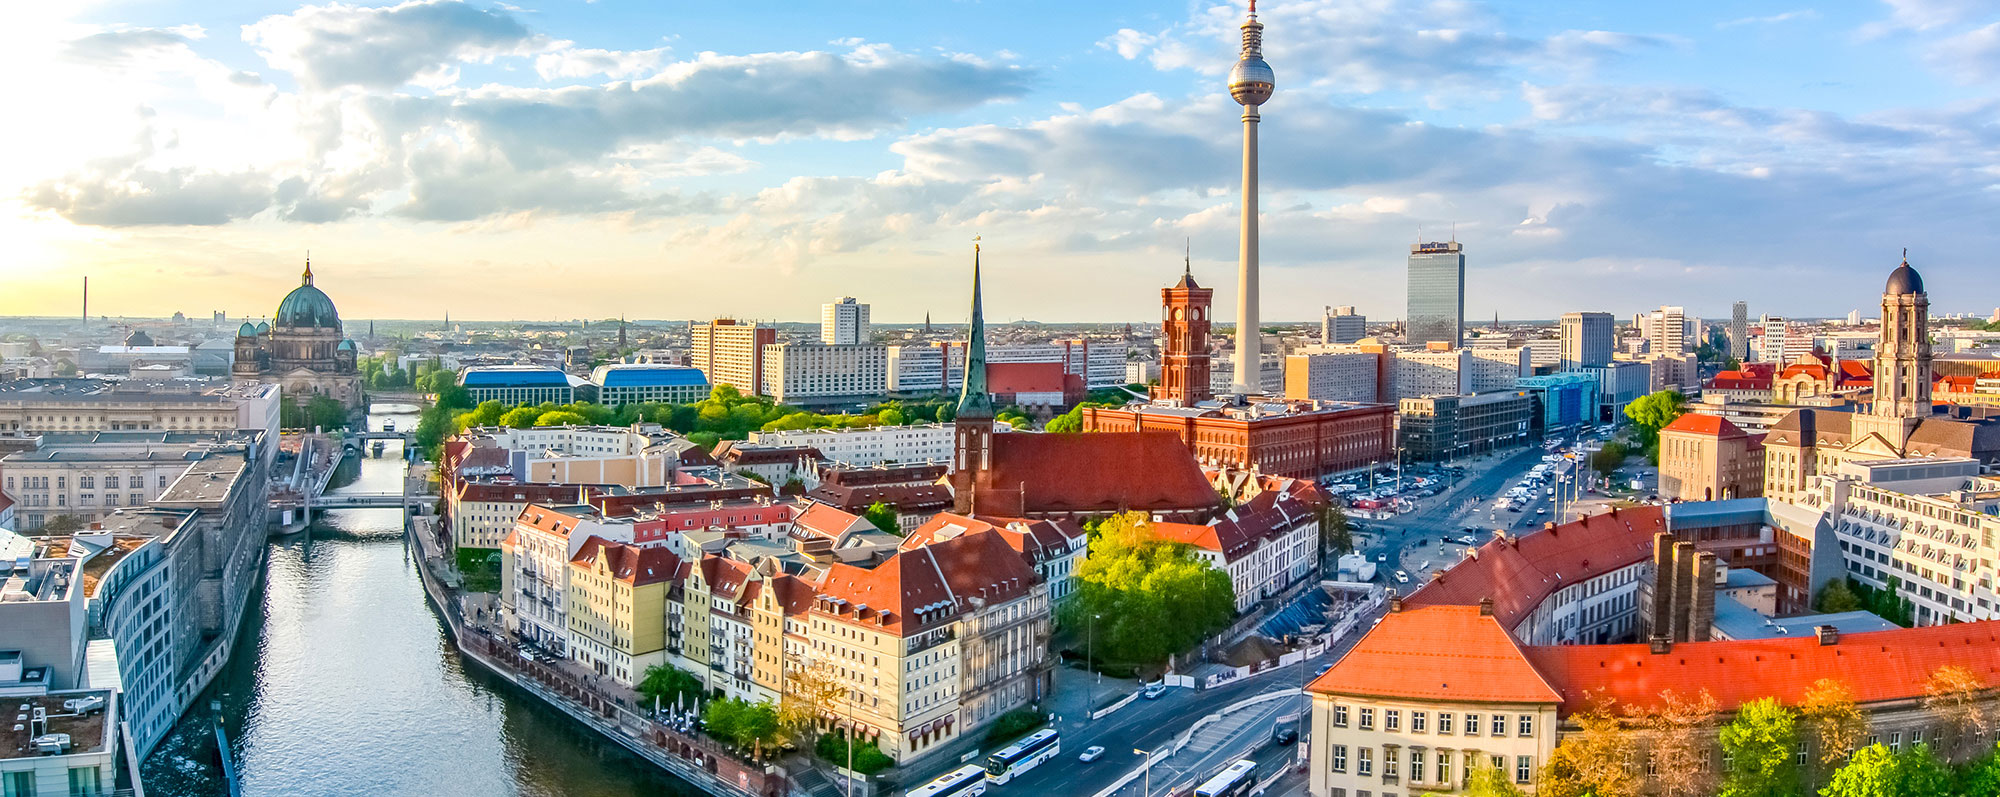 Banner image of the Berlin cityscape